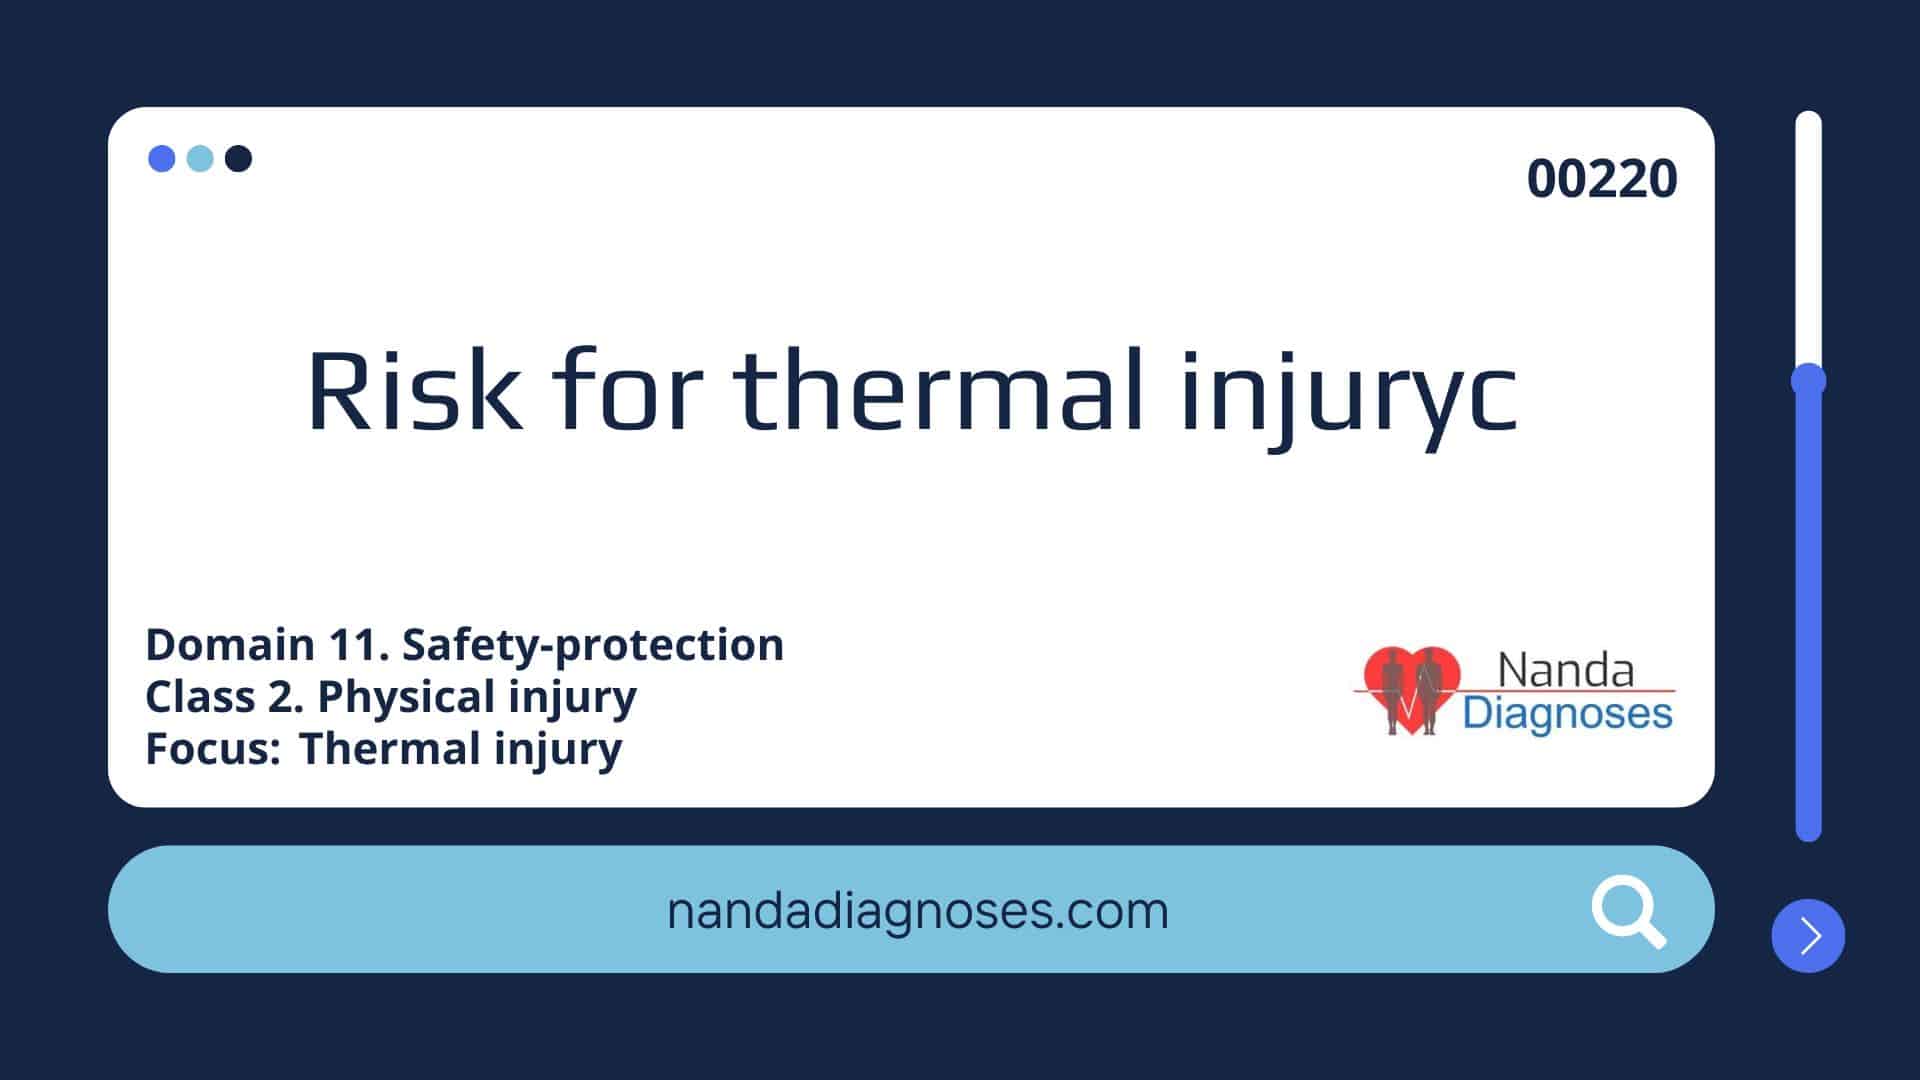 Risk for thermal injuryc